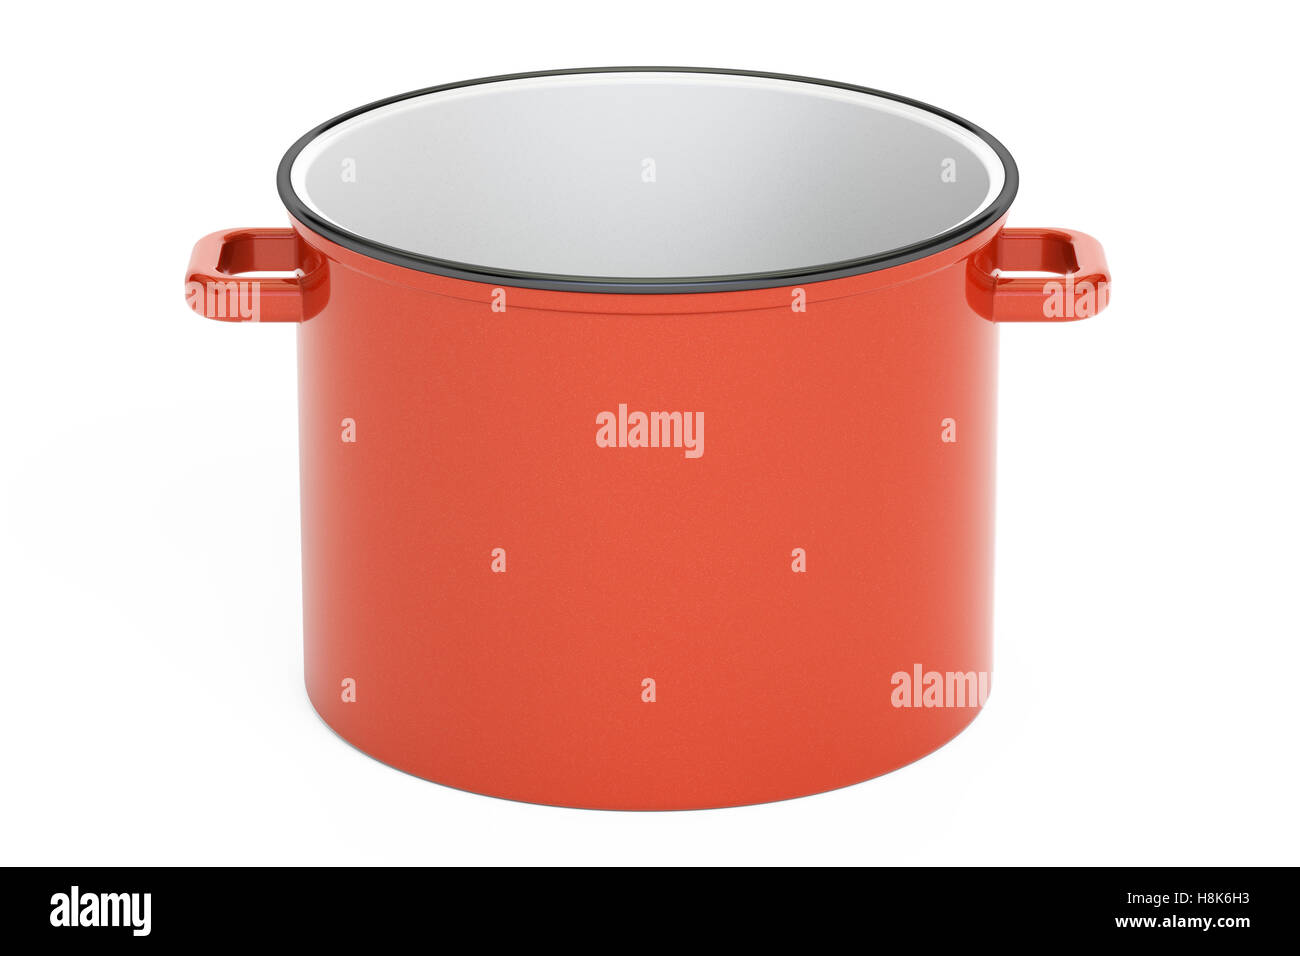 https://c8.alamy.com/comp/H8K6H3/red-cooking-pot-3d-rendering-isolated-on-white-background-H8K6H3.jpg